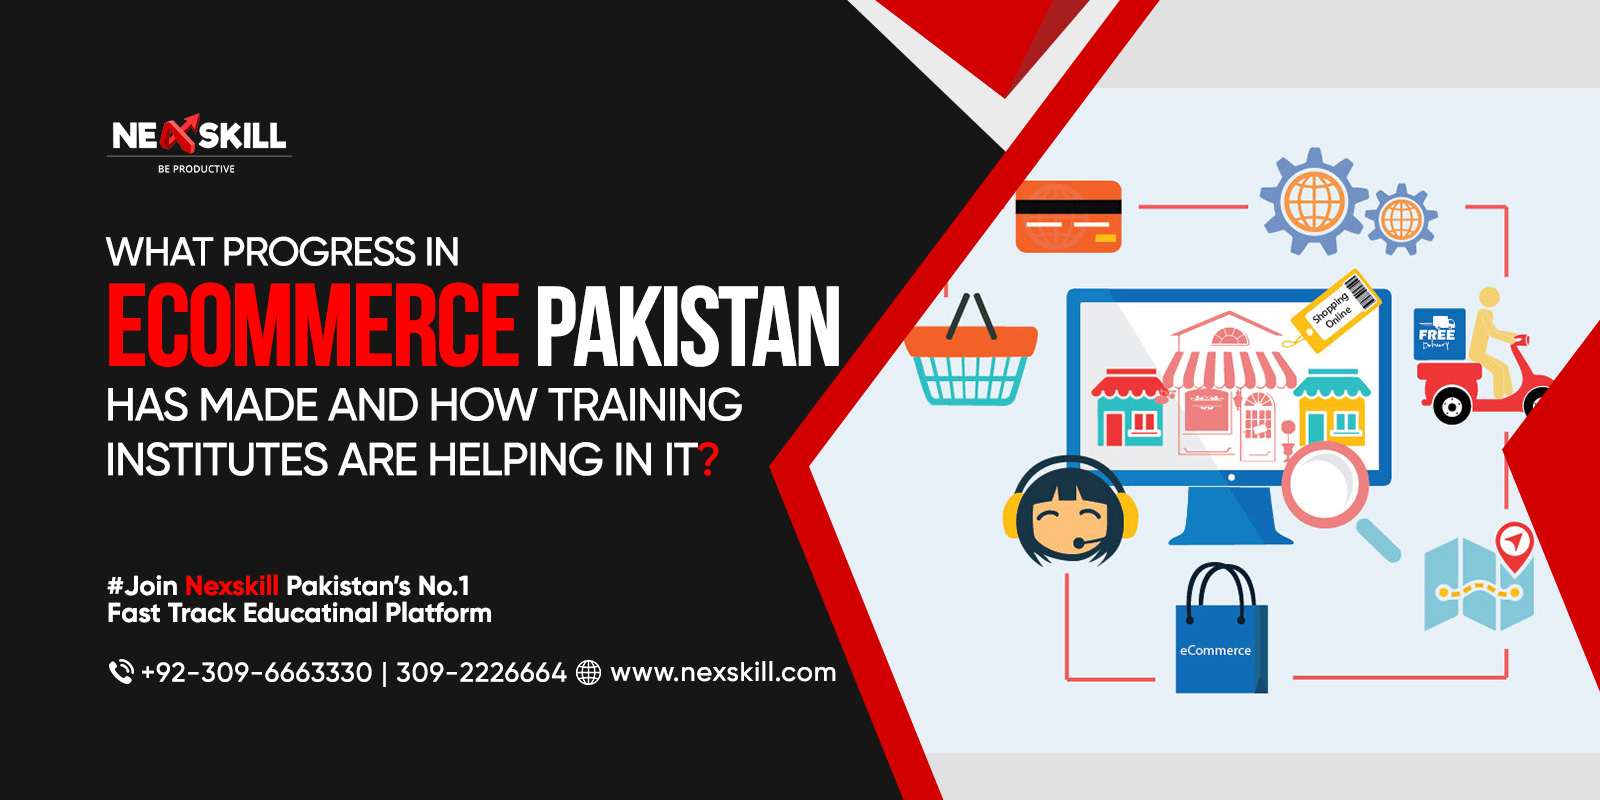 What progress in E-commerce Pakistan has made and how training institutes are helping in it